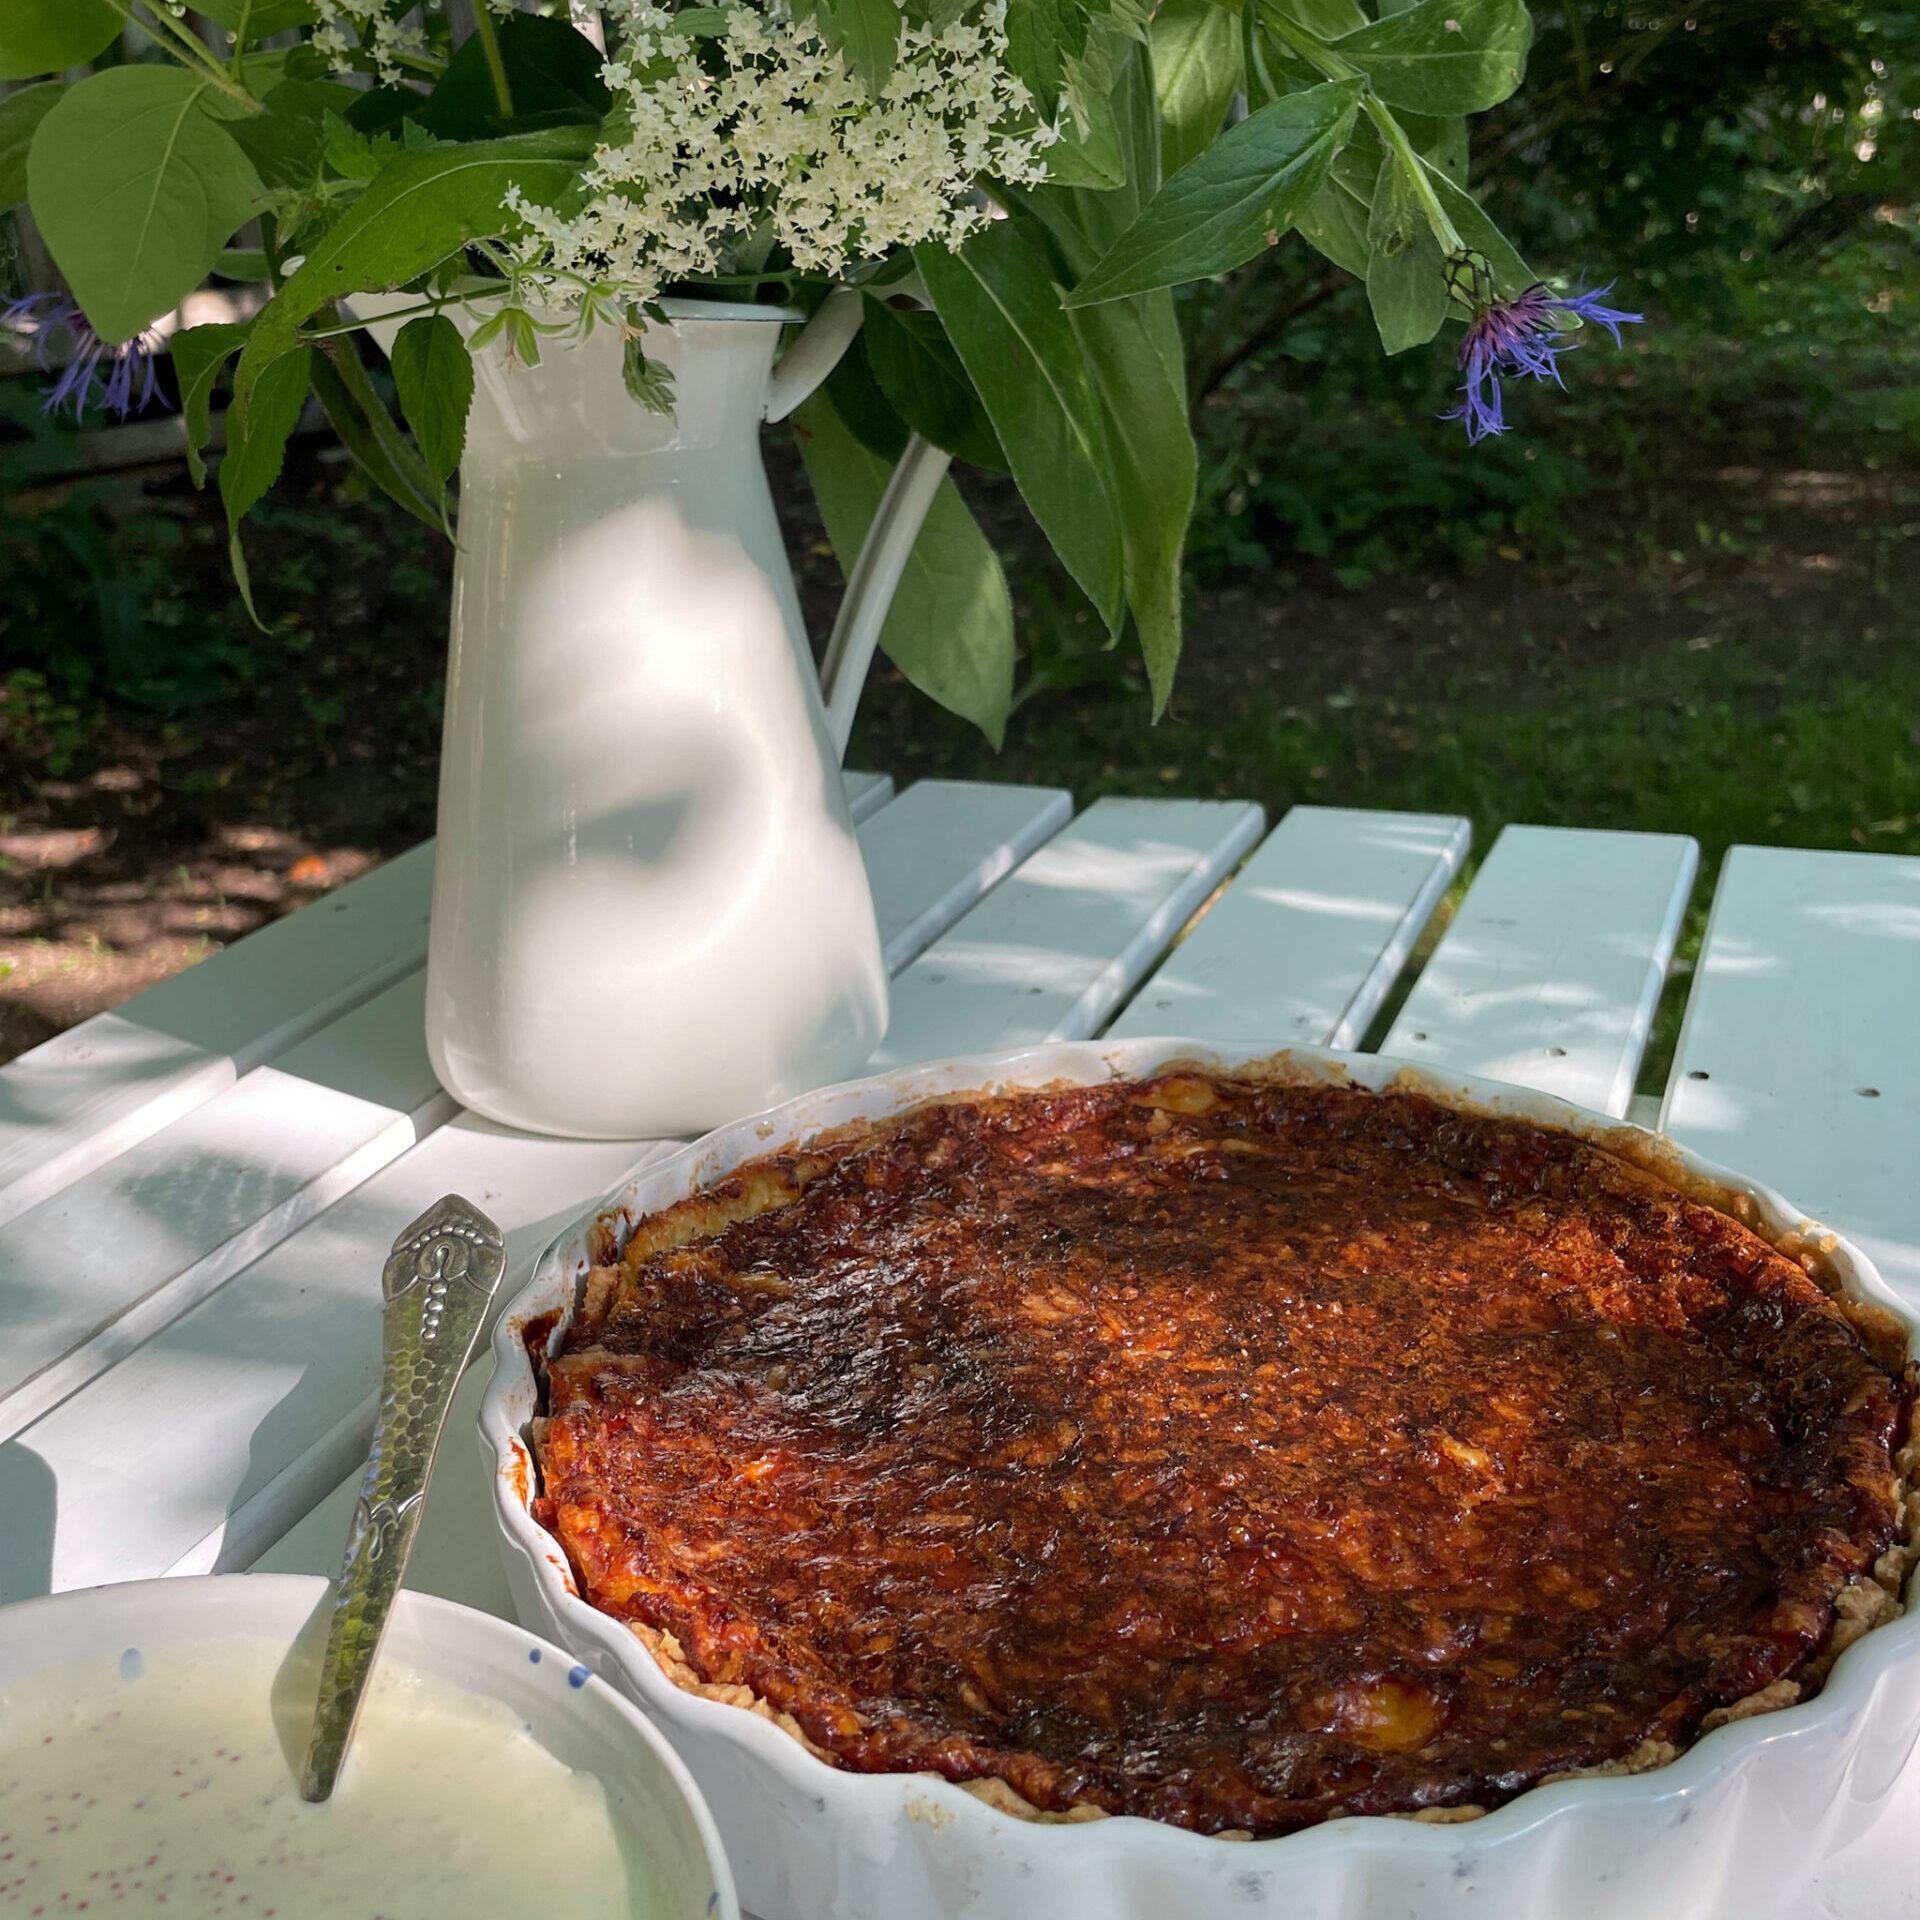 A quiche on a table in front of a vase with flowers.